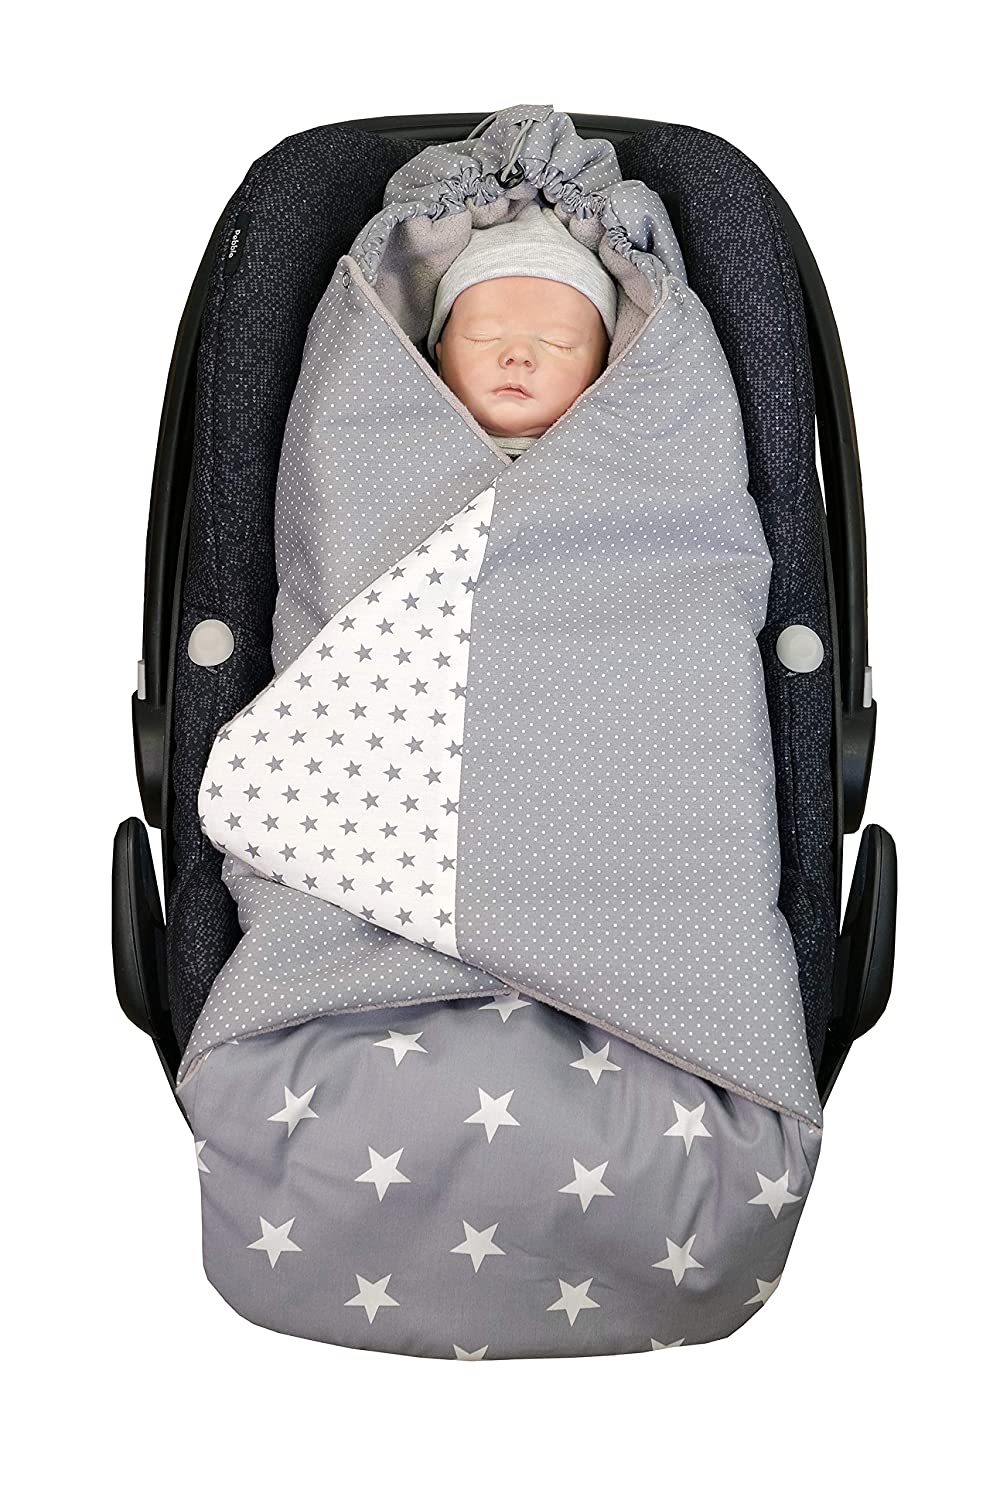 ULLENBOOM ® Baby Swaddling Blanket Summer Grey Stars (Made in EU) – Blanket for Baby Car Seat & Prams, Compatible with Maxi Cosi® Car Seat, Ideal for 0 to 9 Months